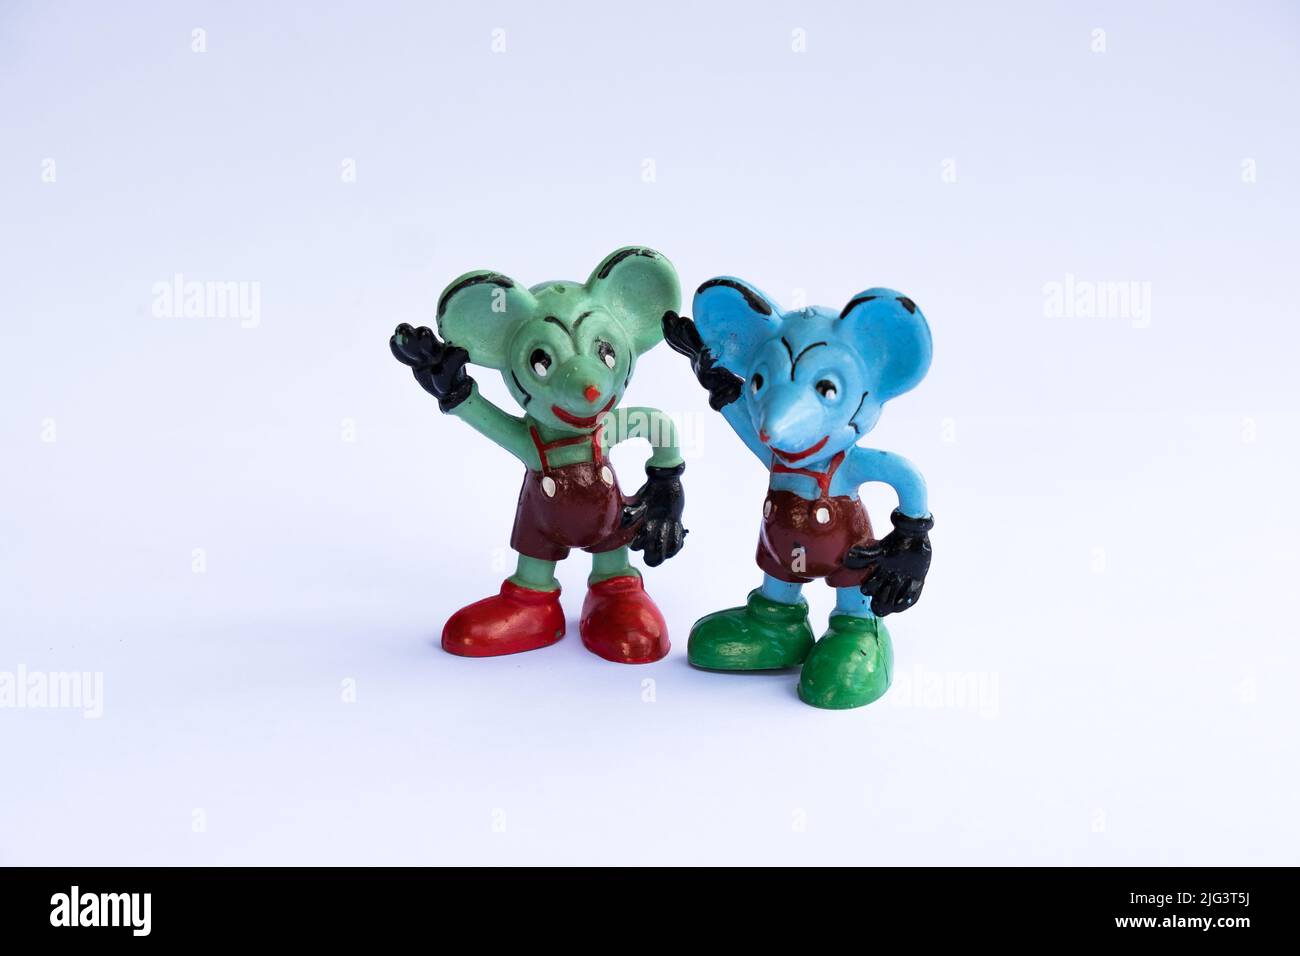 https://c8.alamy.com/comp/2JG3T5J/east-german-gdr-version-of-mickey-mouse-unbranded-old-mouse-rubber-toy-colorful-retro-mice-figures-popular-vintage-soviet-toy-from-70s-80s-2JG3T5J.jpg